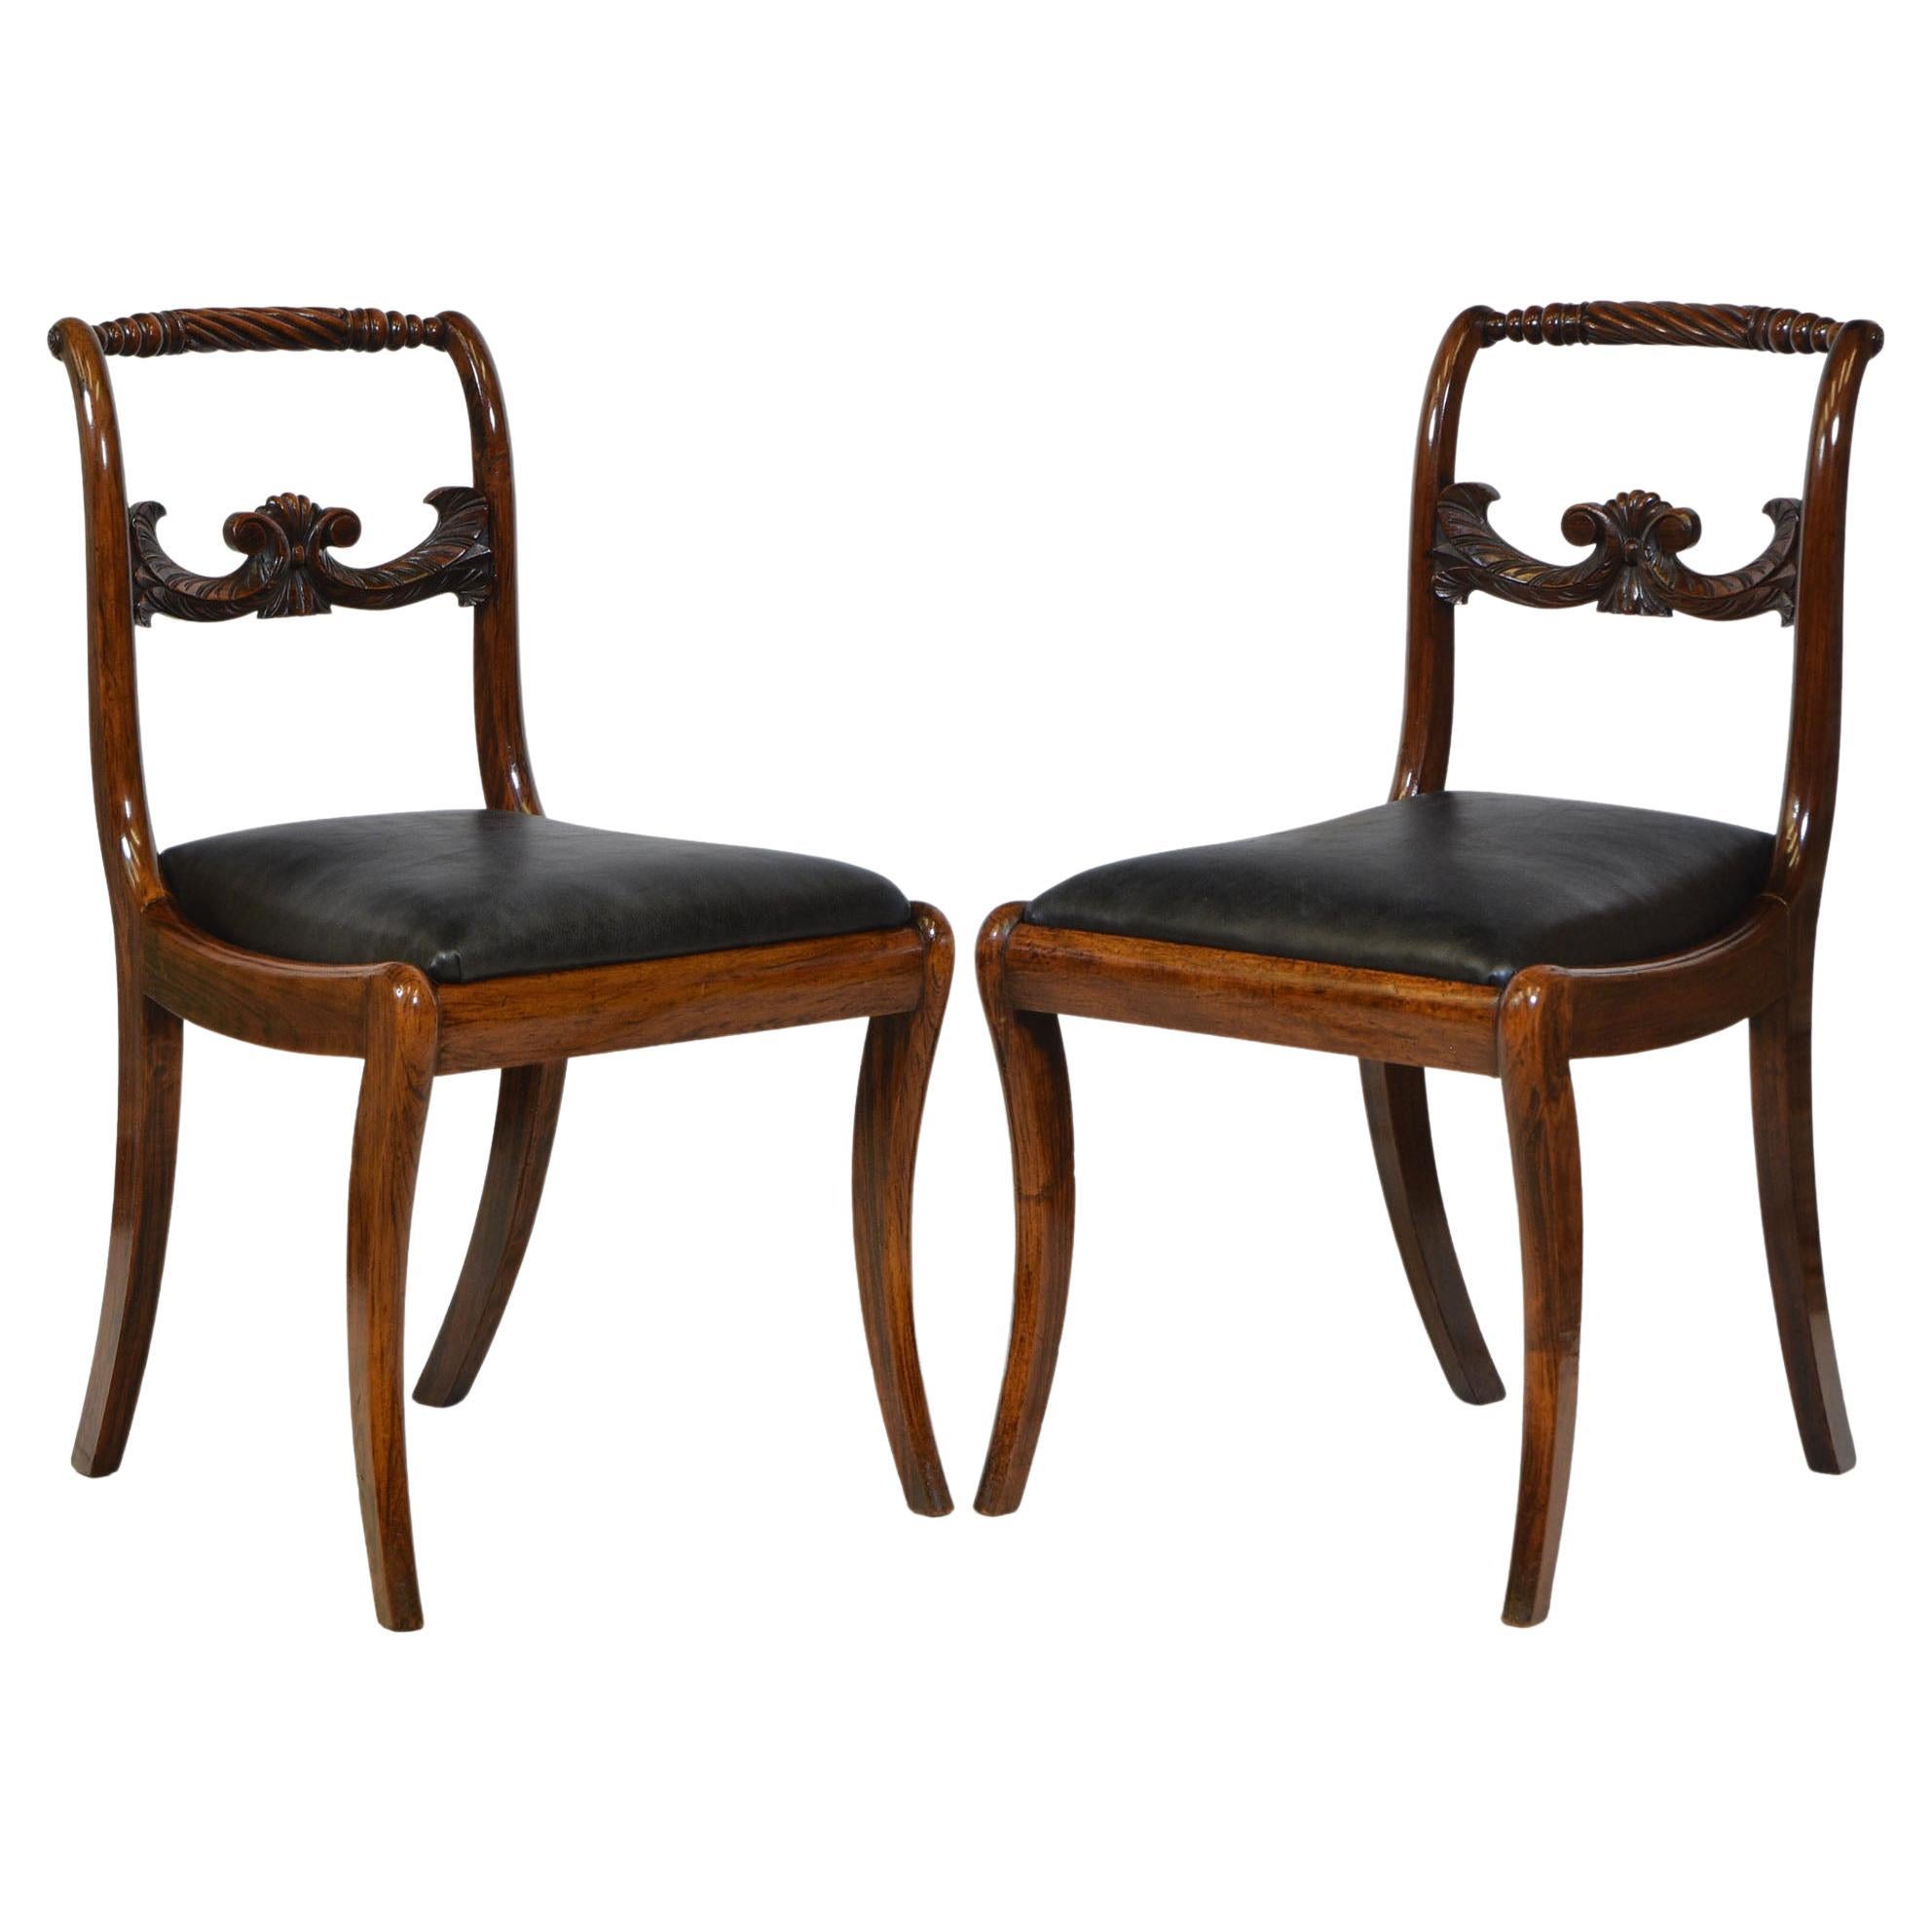 Pair Regency Simulated Rosewood & Leather Trafalgar Chairs, Circa 1820 For Sale